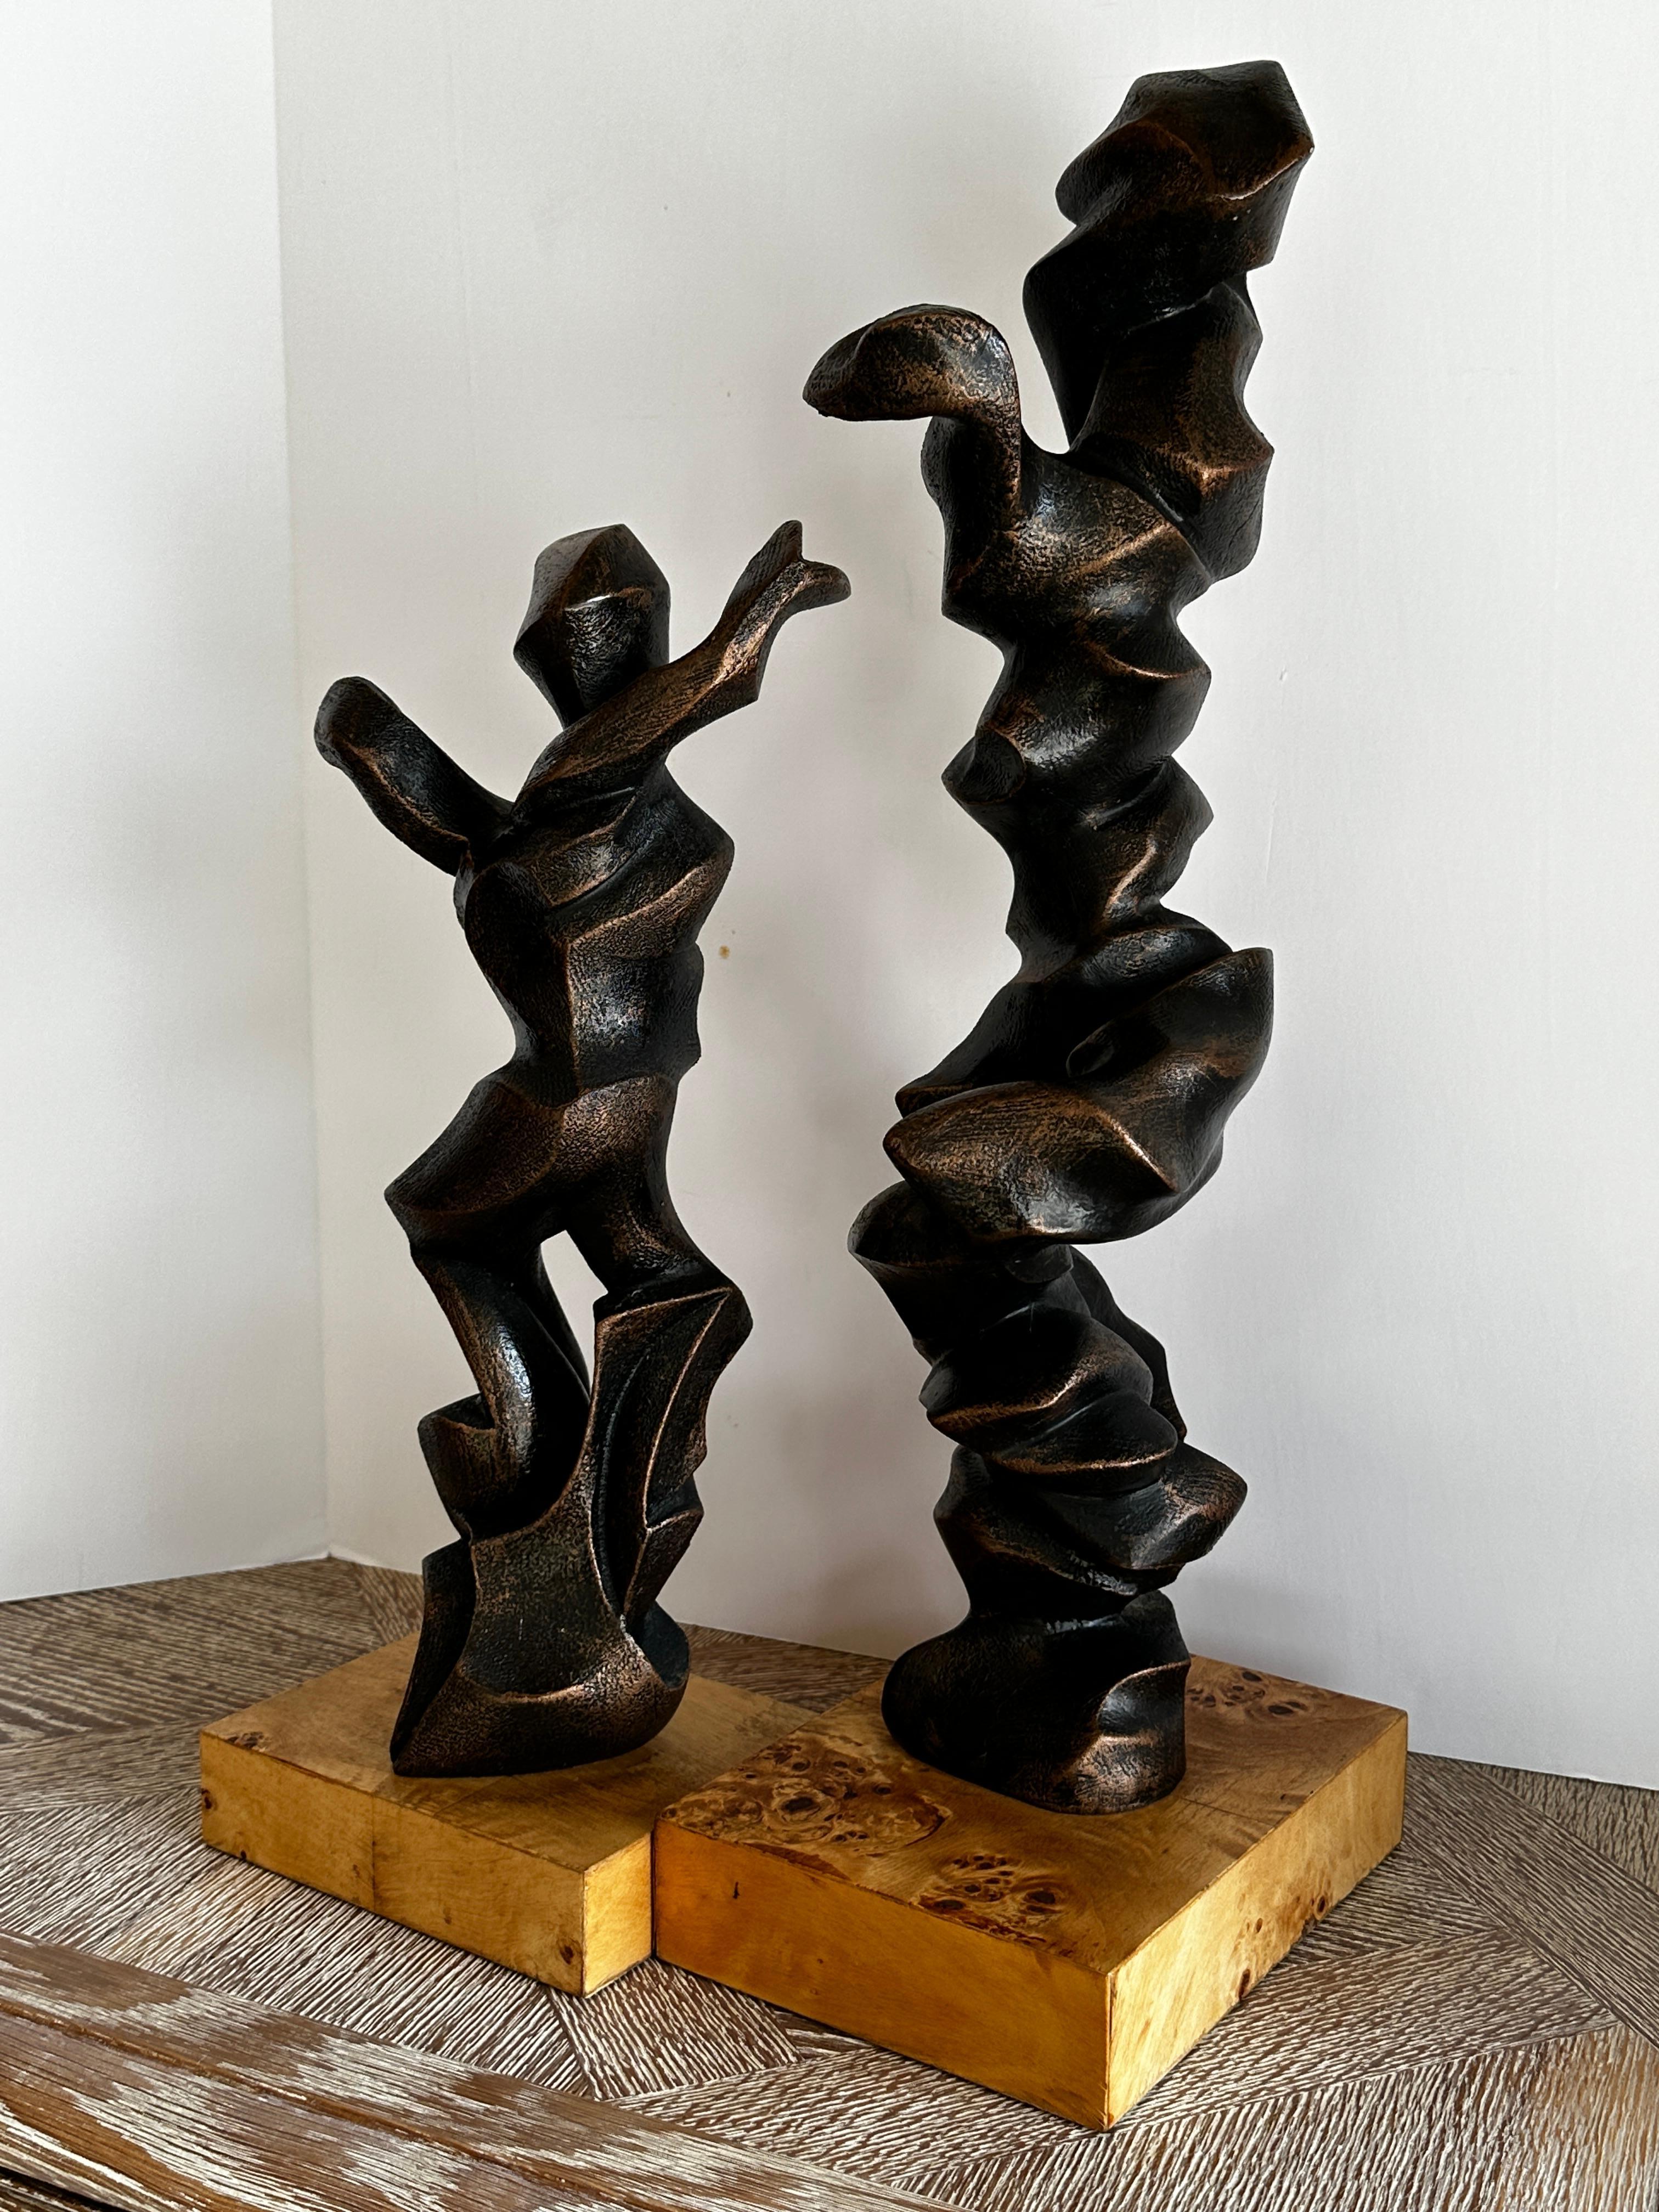 Sculpture is at its most essential, a physical, tactile medium, and need to be touched to be experienced. Handmade resin sculpture is an intricate process that entails the mastery of various skills and techniques. 

This pair of dancers, in gun